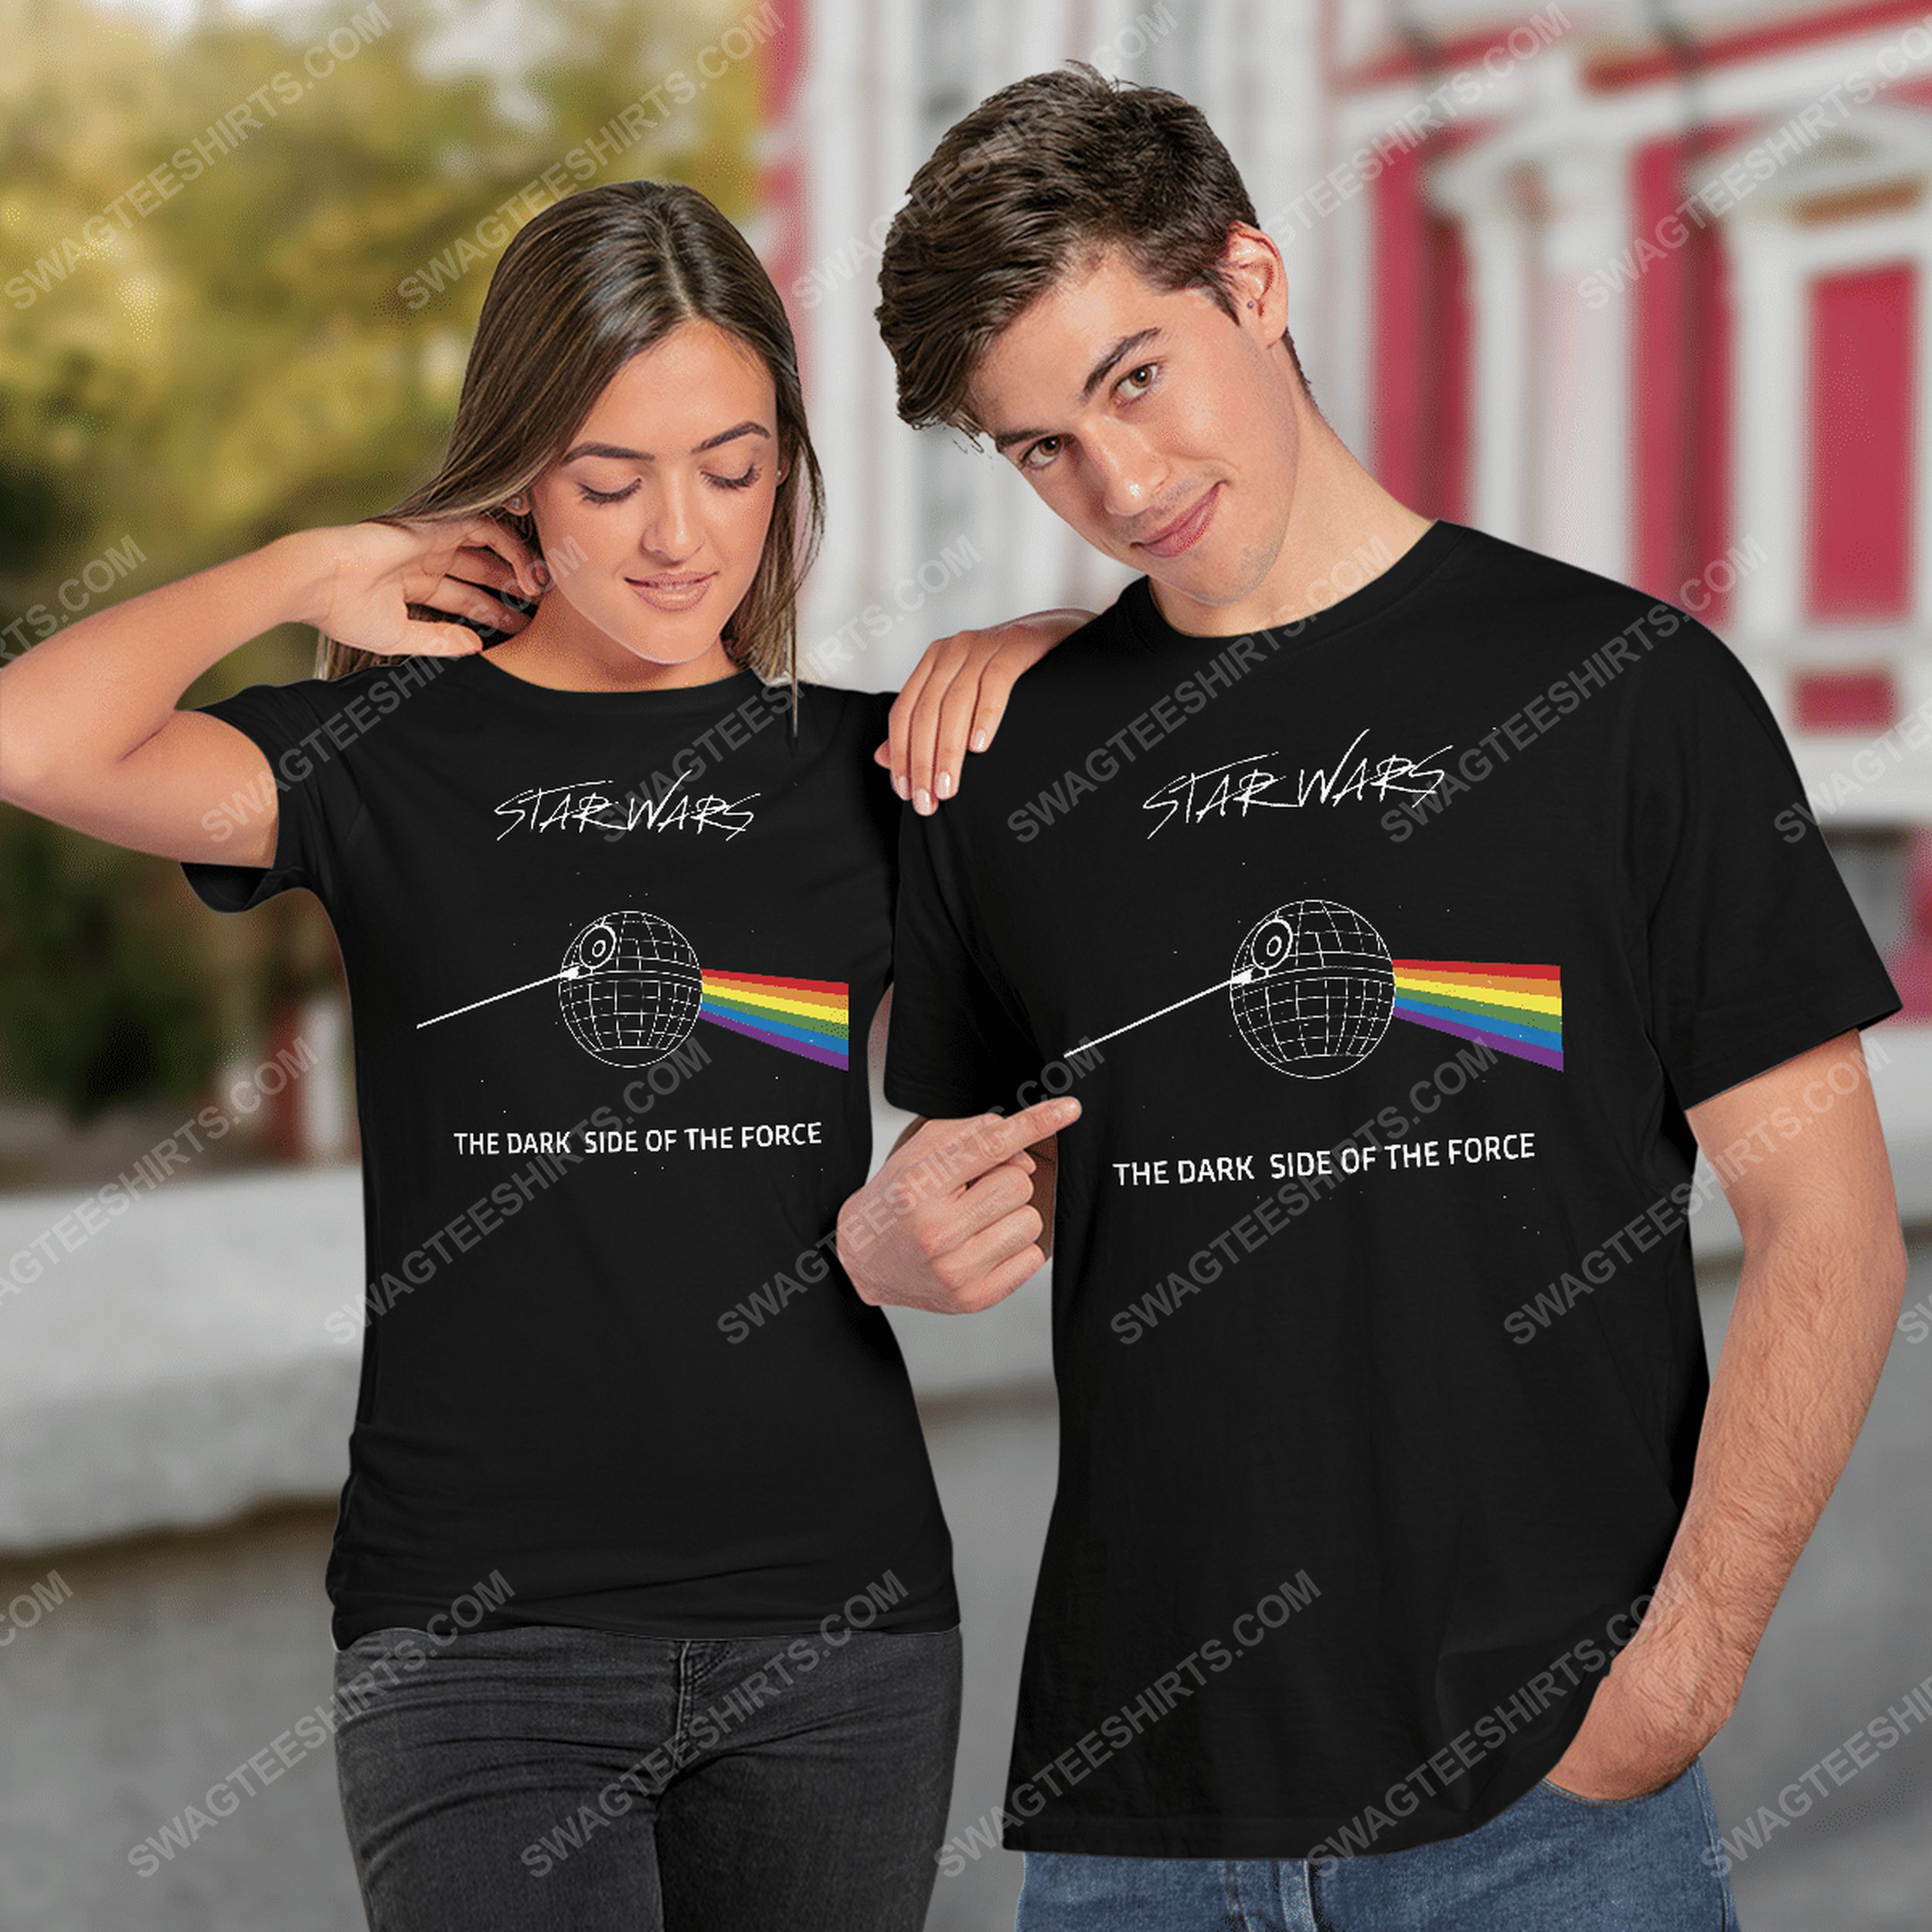 Star wars and pink floyd the dark side of the force tshirt(1)